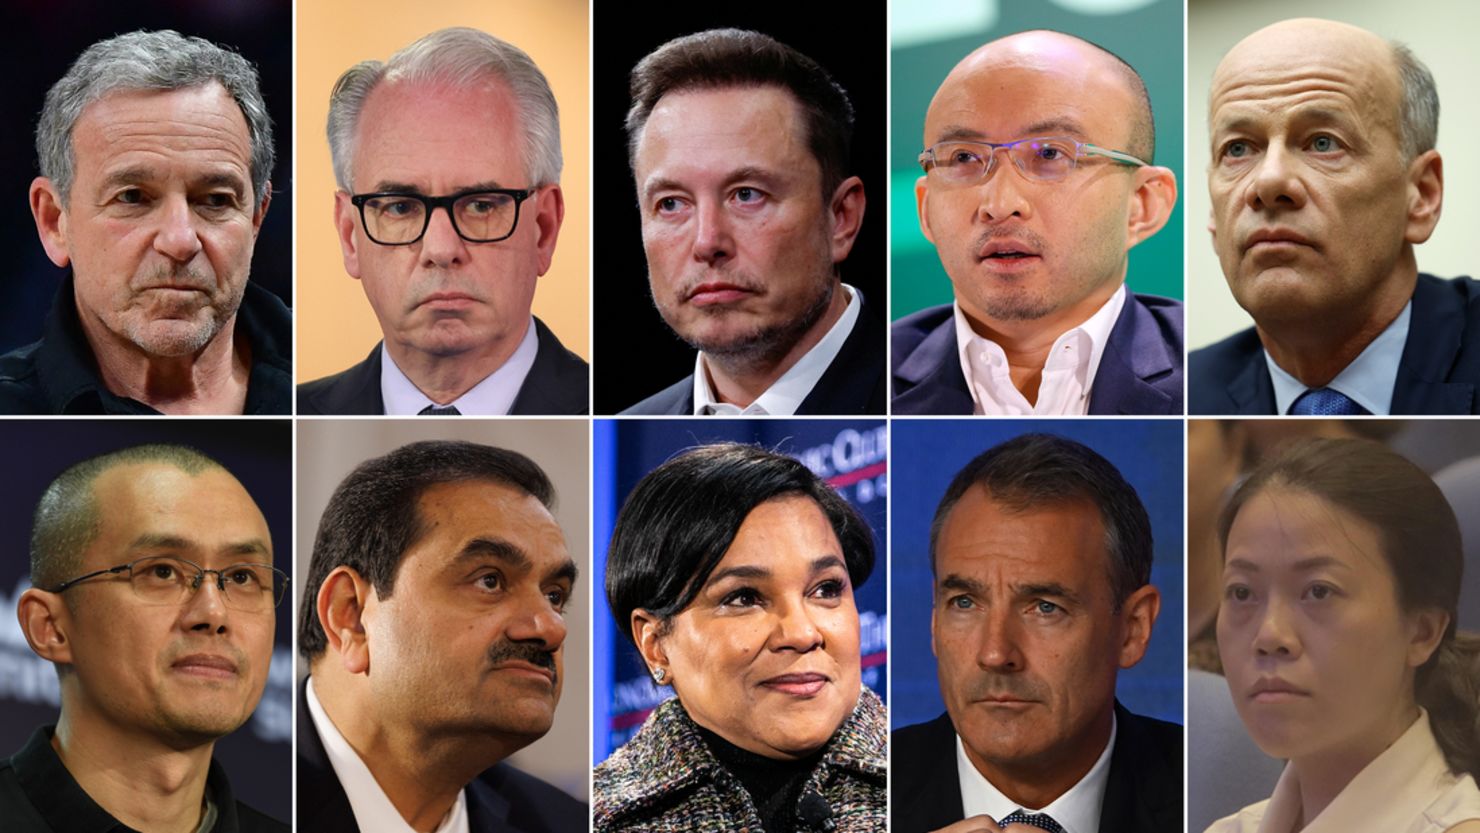 From top, clockwise: Disney CEO Bob Iger, Credit Suisse CEO Ulrich Körner, Tesla, SpaceX CEO, and X (formerly Twitter) owner and former CEO Elon Musk, China Renaissance CEO Bao Fan, Silicon Valley Bank CEO Greg Becker, Country Garden CEO Yang Huiyan, BP CEO Bernard Looney, Walgreens Boots Alliance CEO Rosalind Brewer, Adani Group CEO Gautam Adani, Binance CEO Changpeng Zhao.